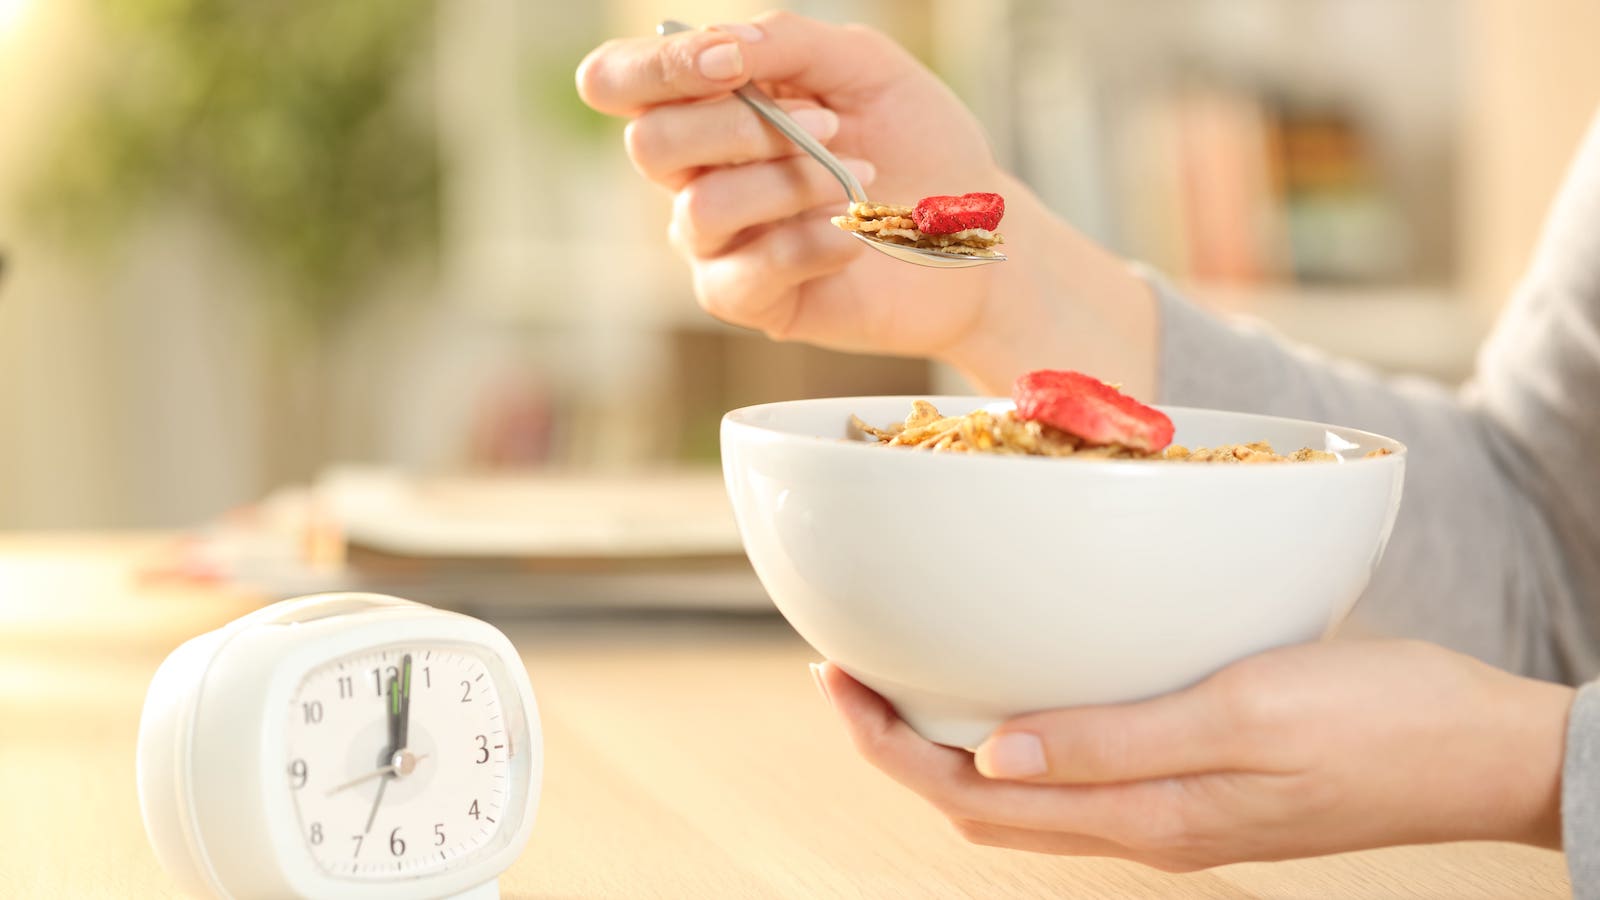 Close-up of woman's hands eating cereal bowl with fruit after intermittent fasting sitting on a table at home. | Image by Pheelings Media, Shutterstock